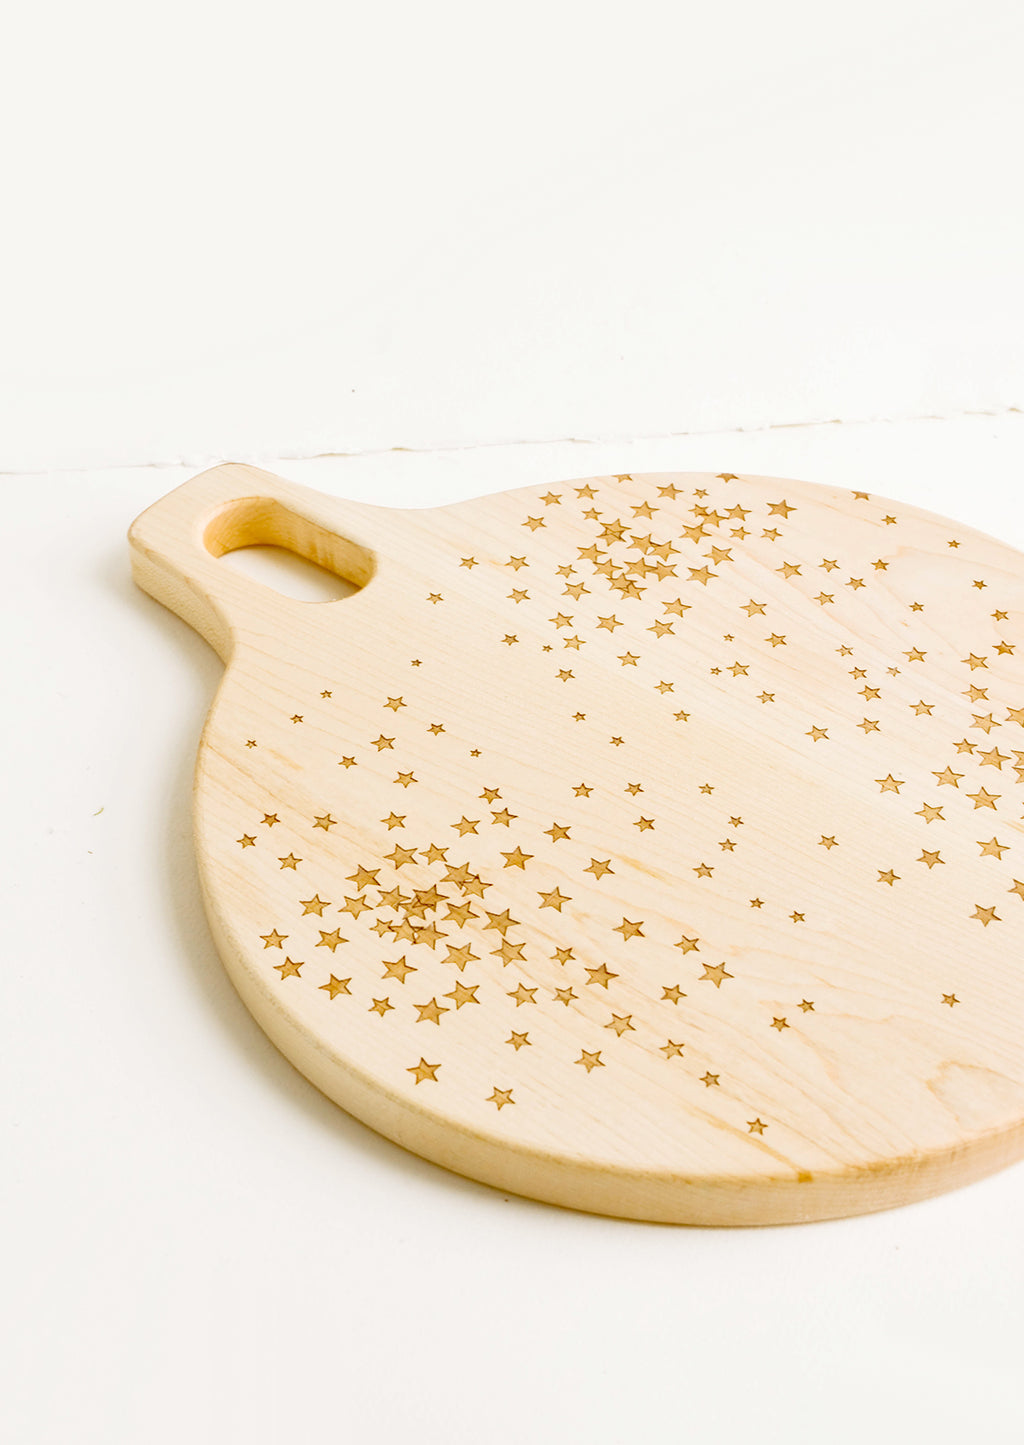 2: Round paddle-style cutting board in maple wood with scattered star pattern